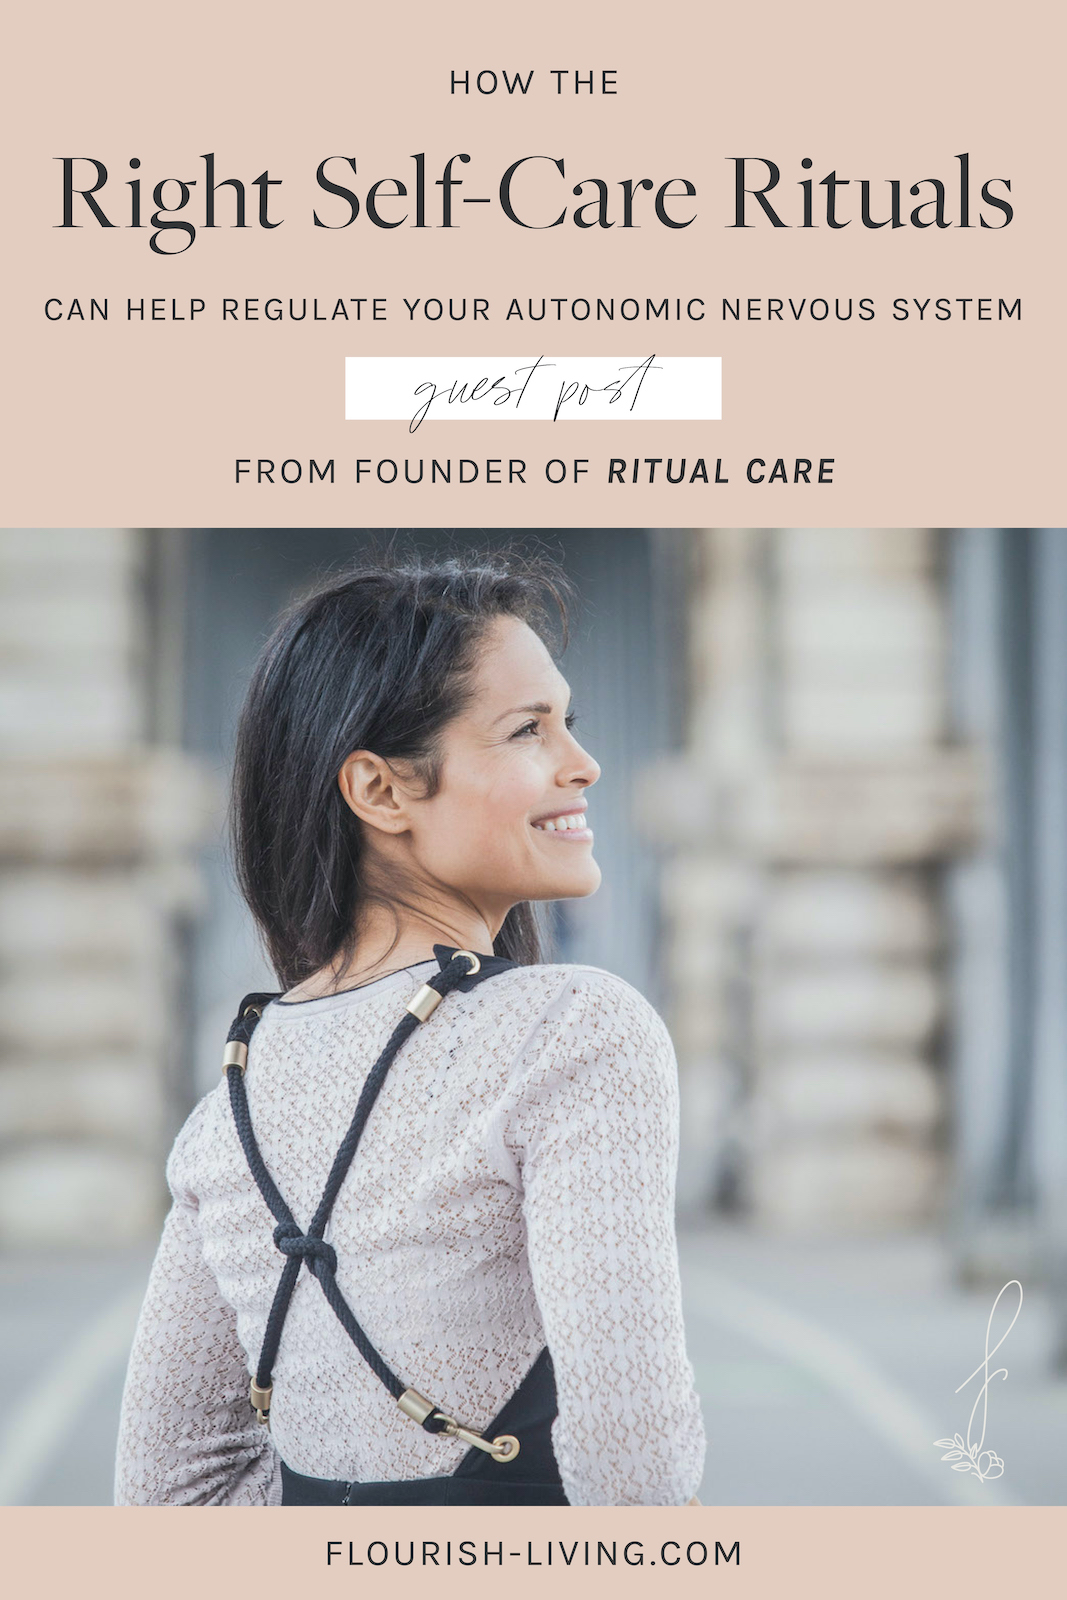 How_The_Right_Self_Care_Rituals_Can_Help_Regulate_Your_Autonomic_Nervous_System_Ritual_Care